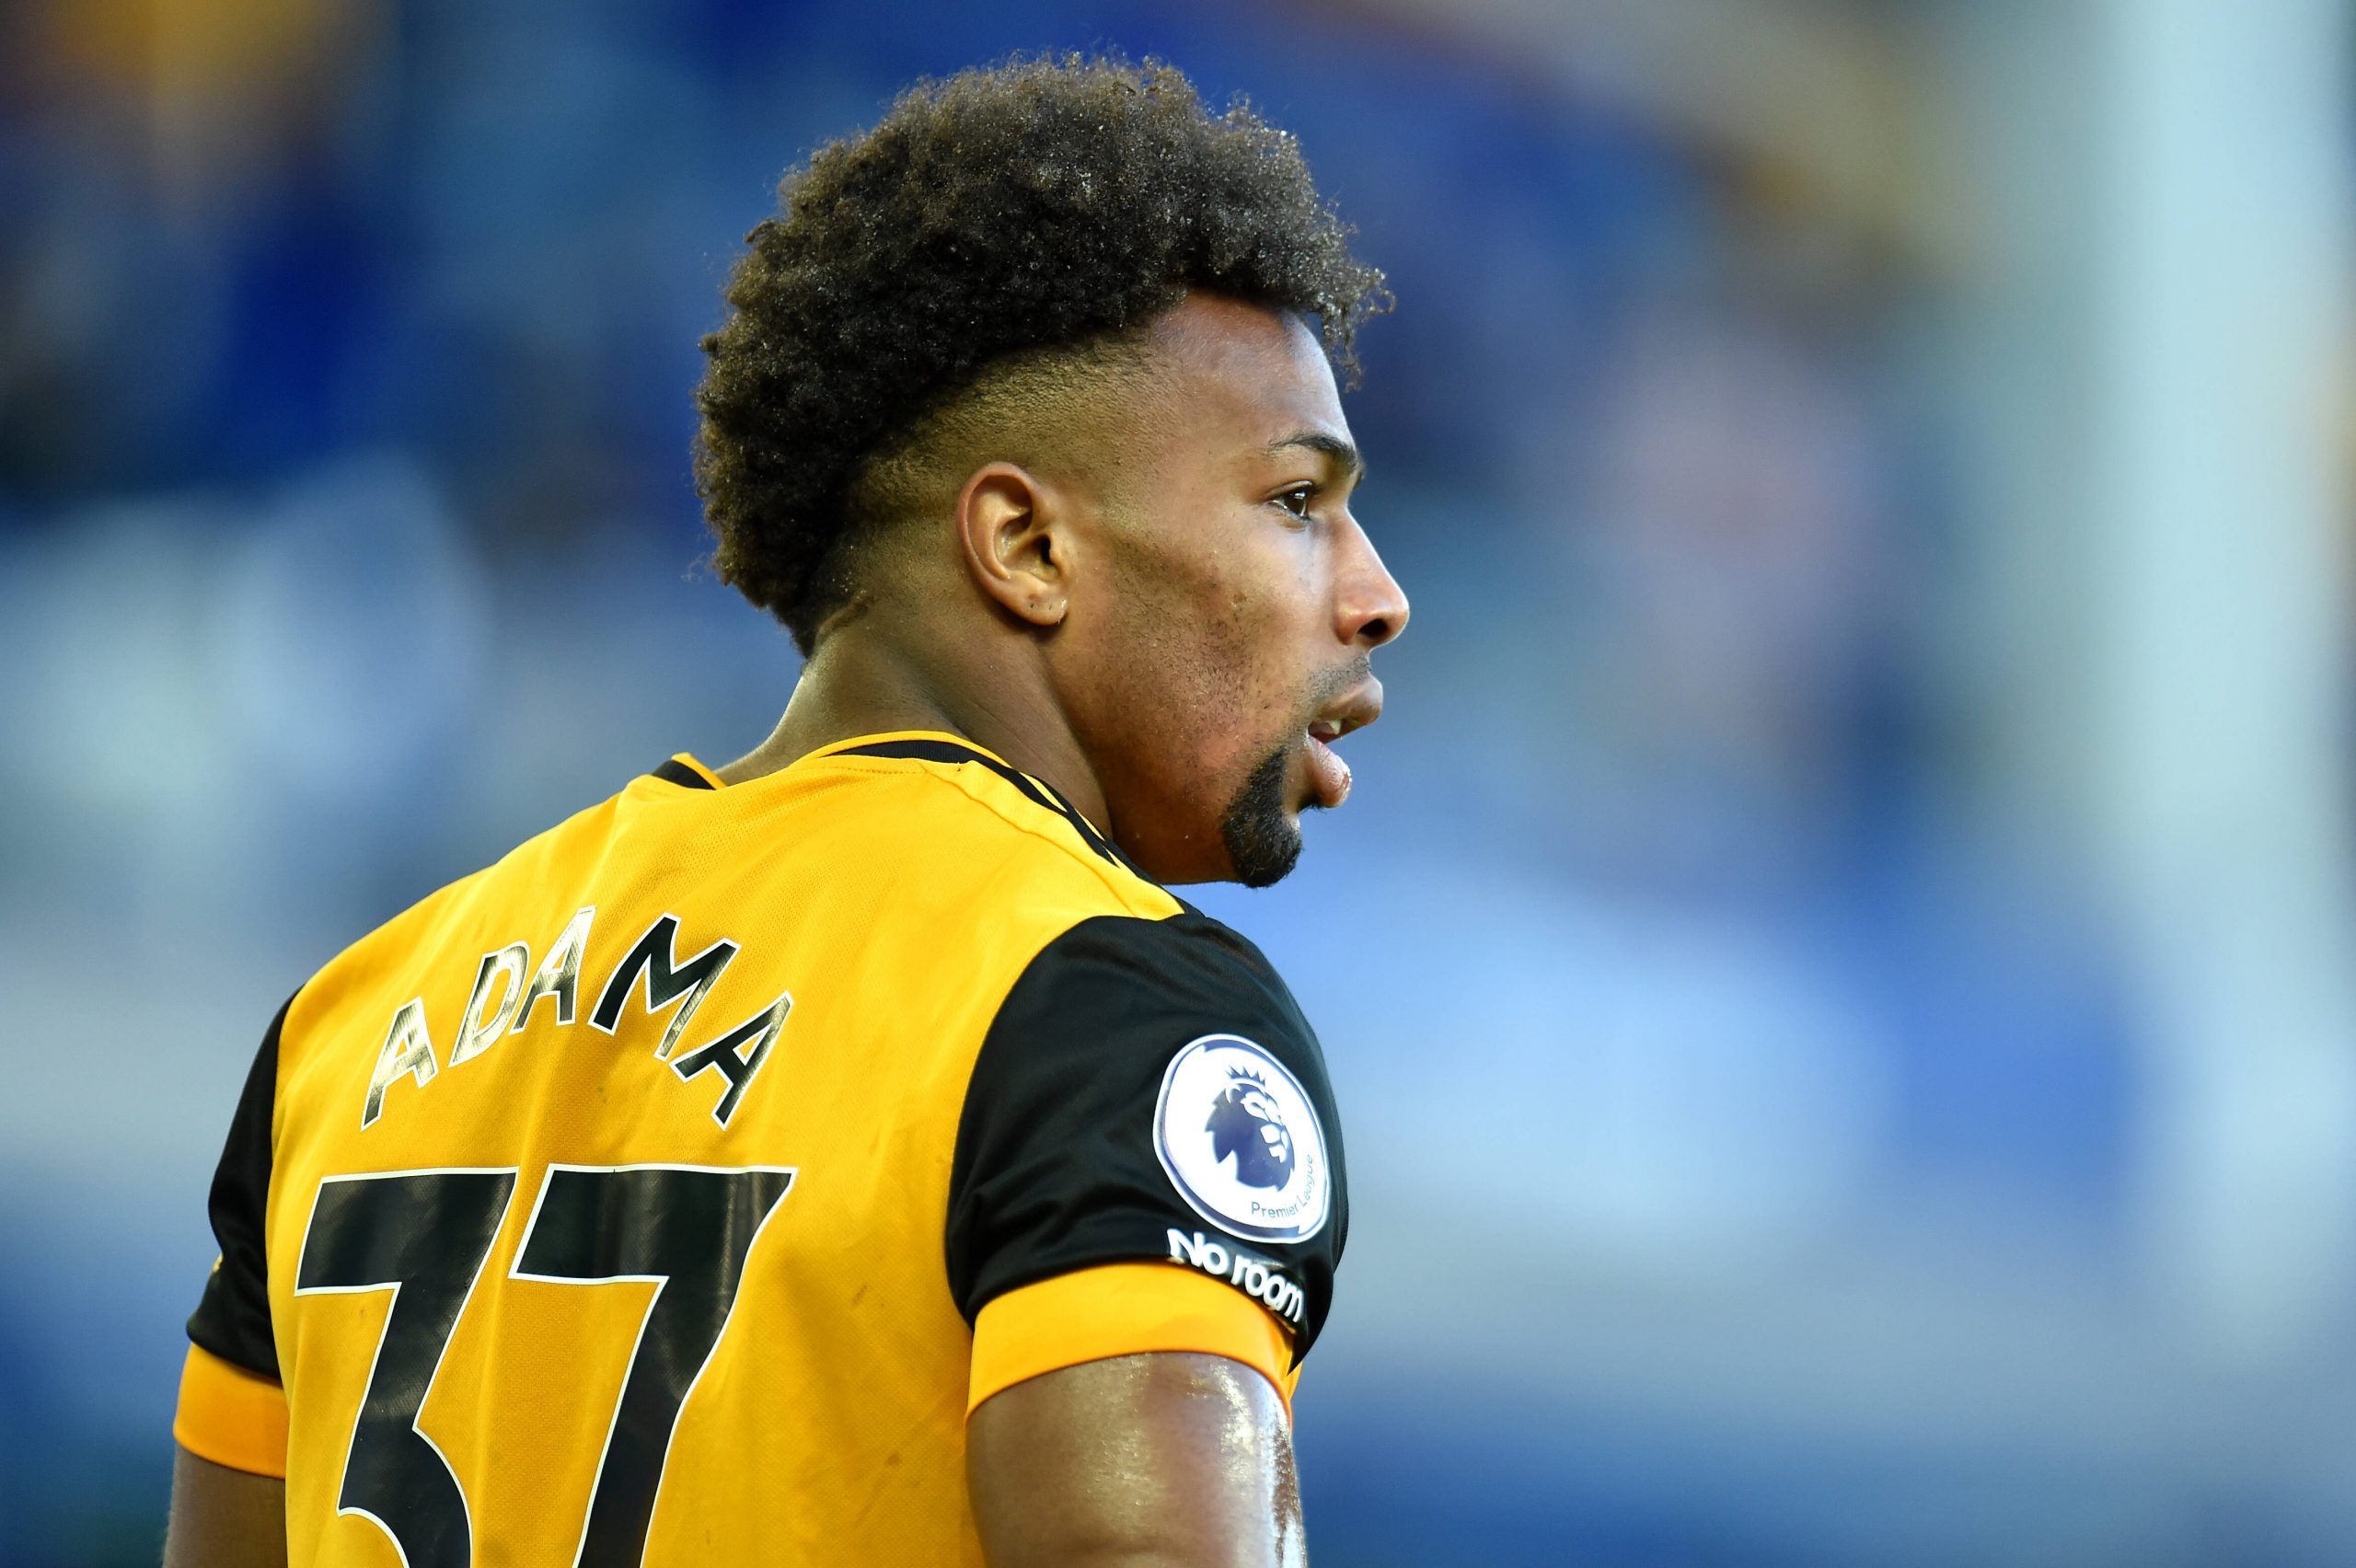 Wolves warn they will "protect" Adama Traore like Tottenham Hotspur fought for Harry Kane.